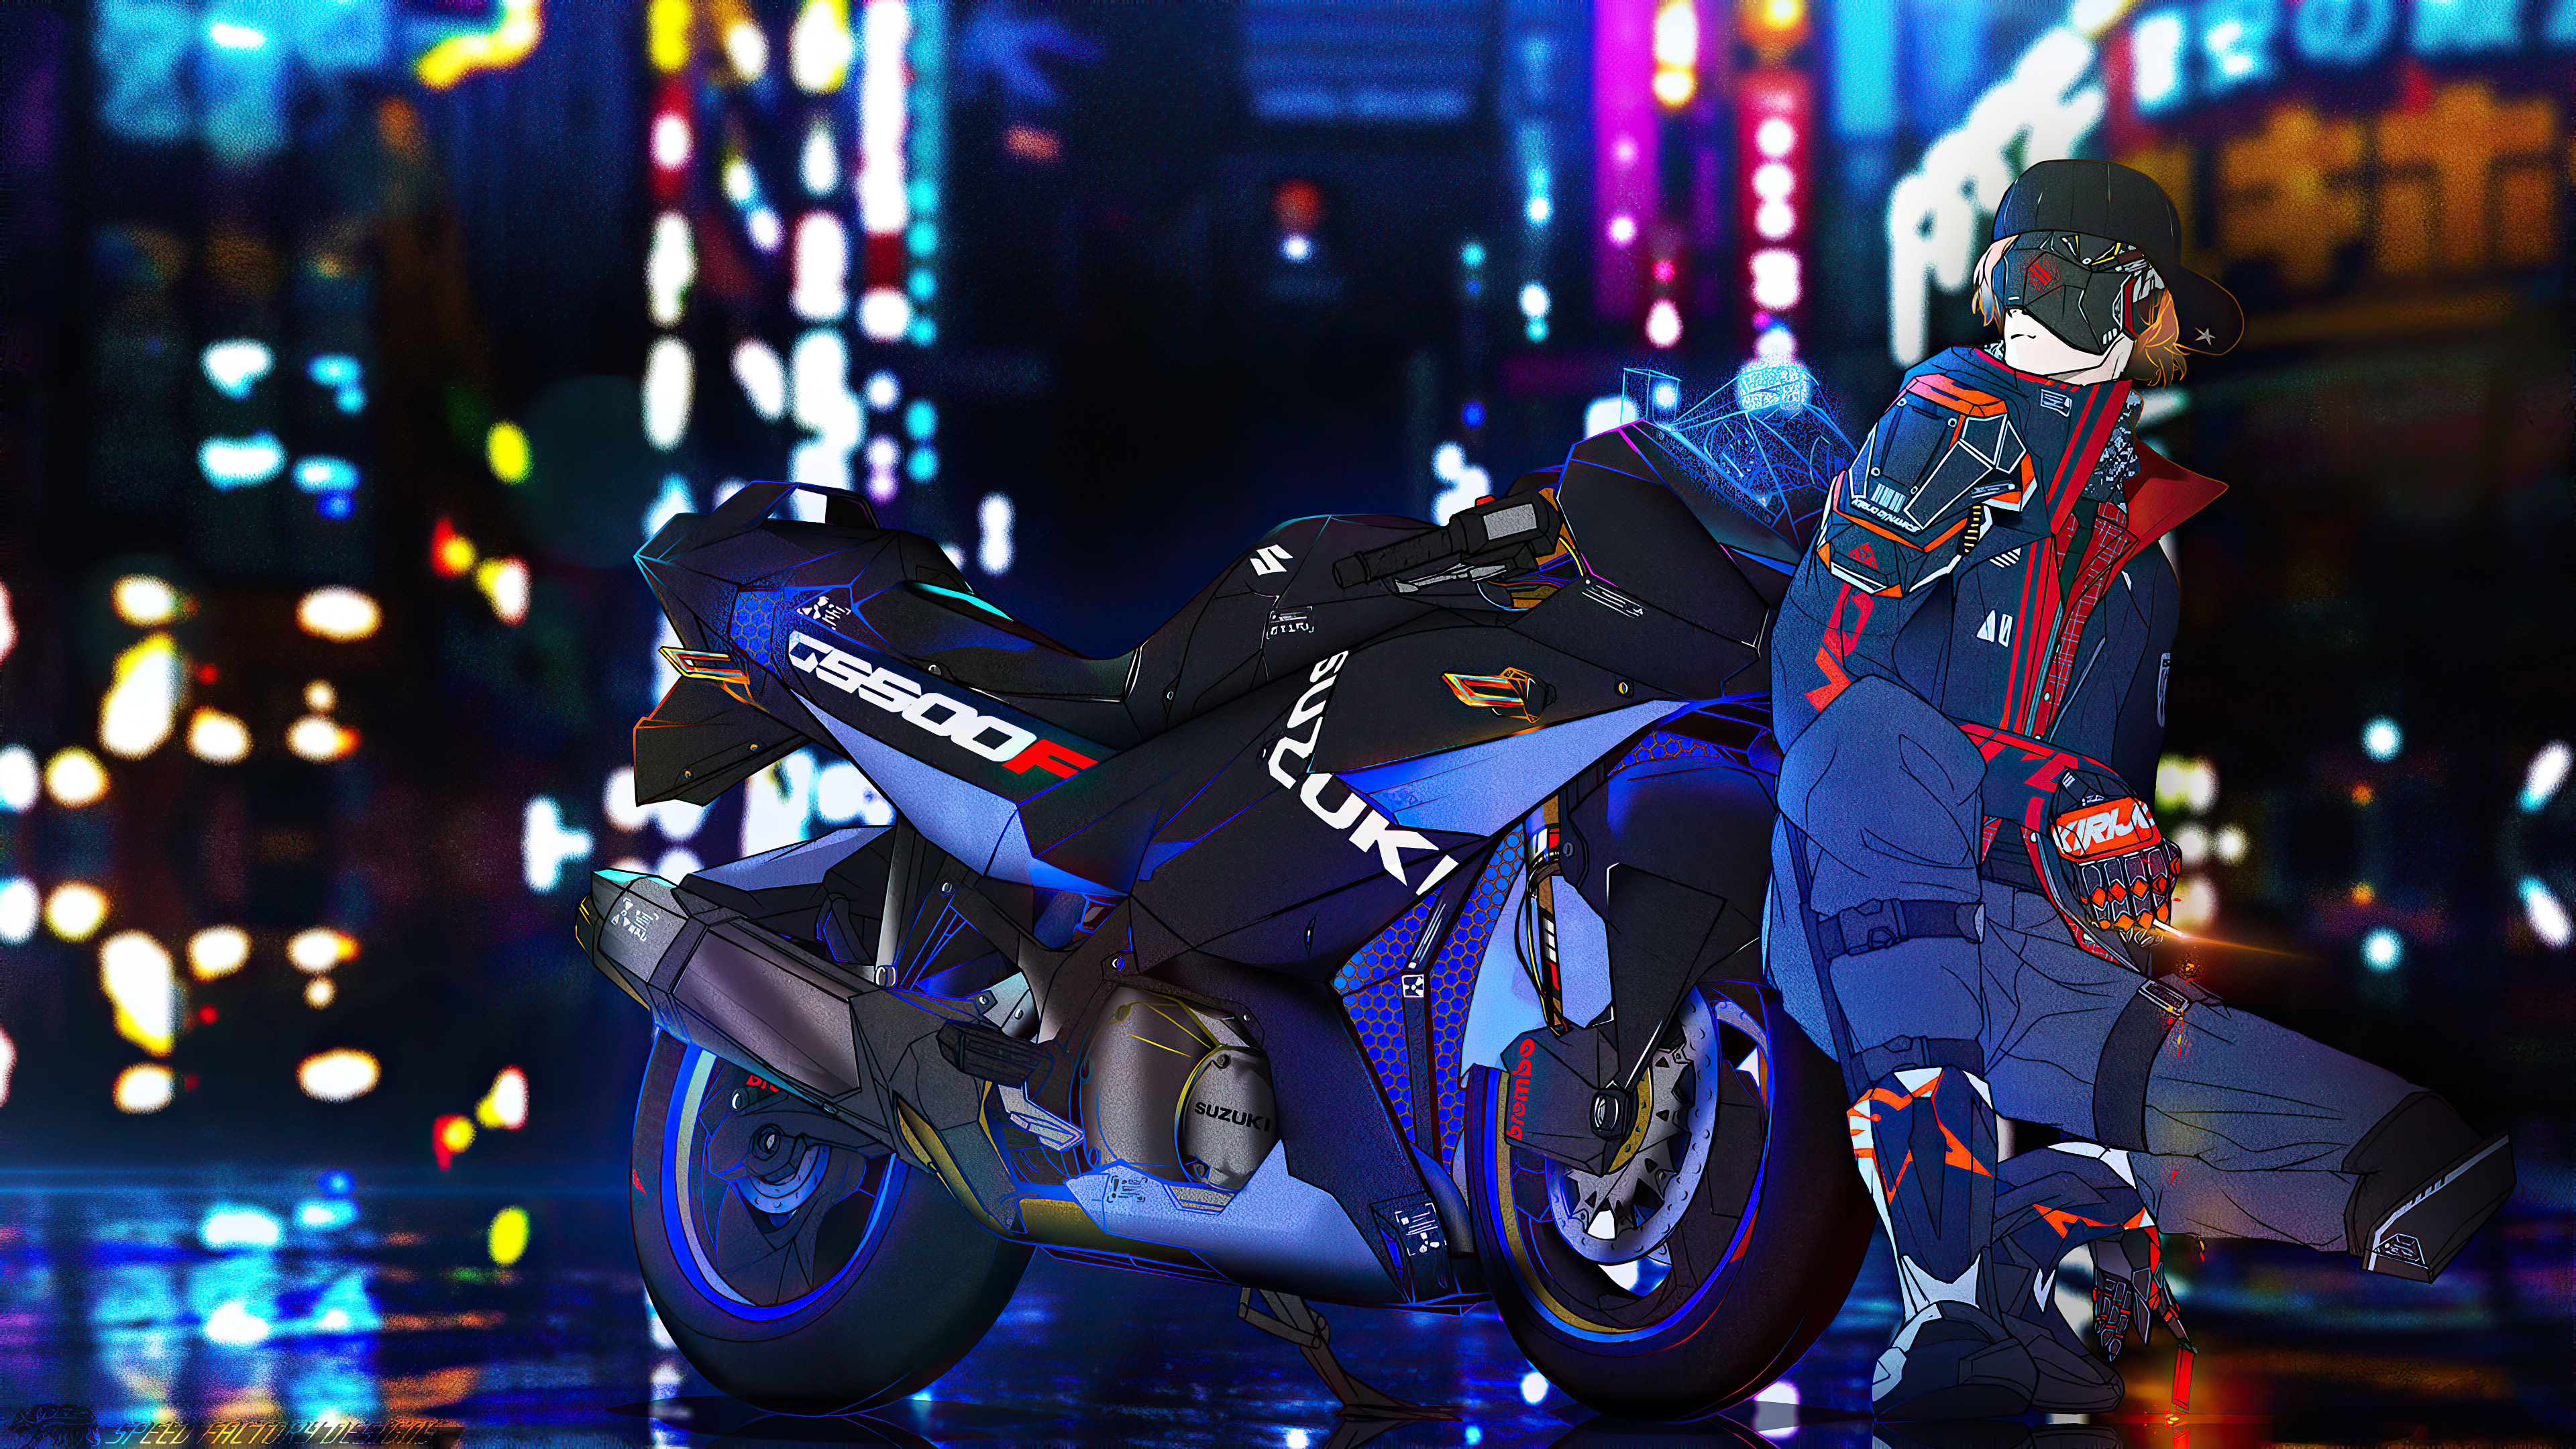 Suzuki Gs500f Bike Cyberpunk Boy, HD Artist, 4k Wallpapers, Images,  Backgrounds, Photos and Pictures